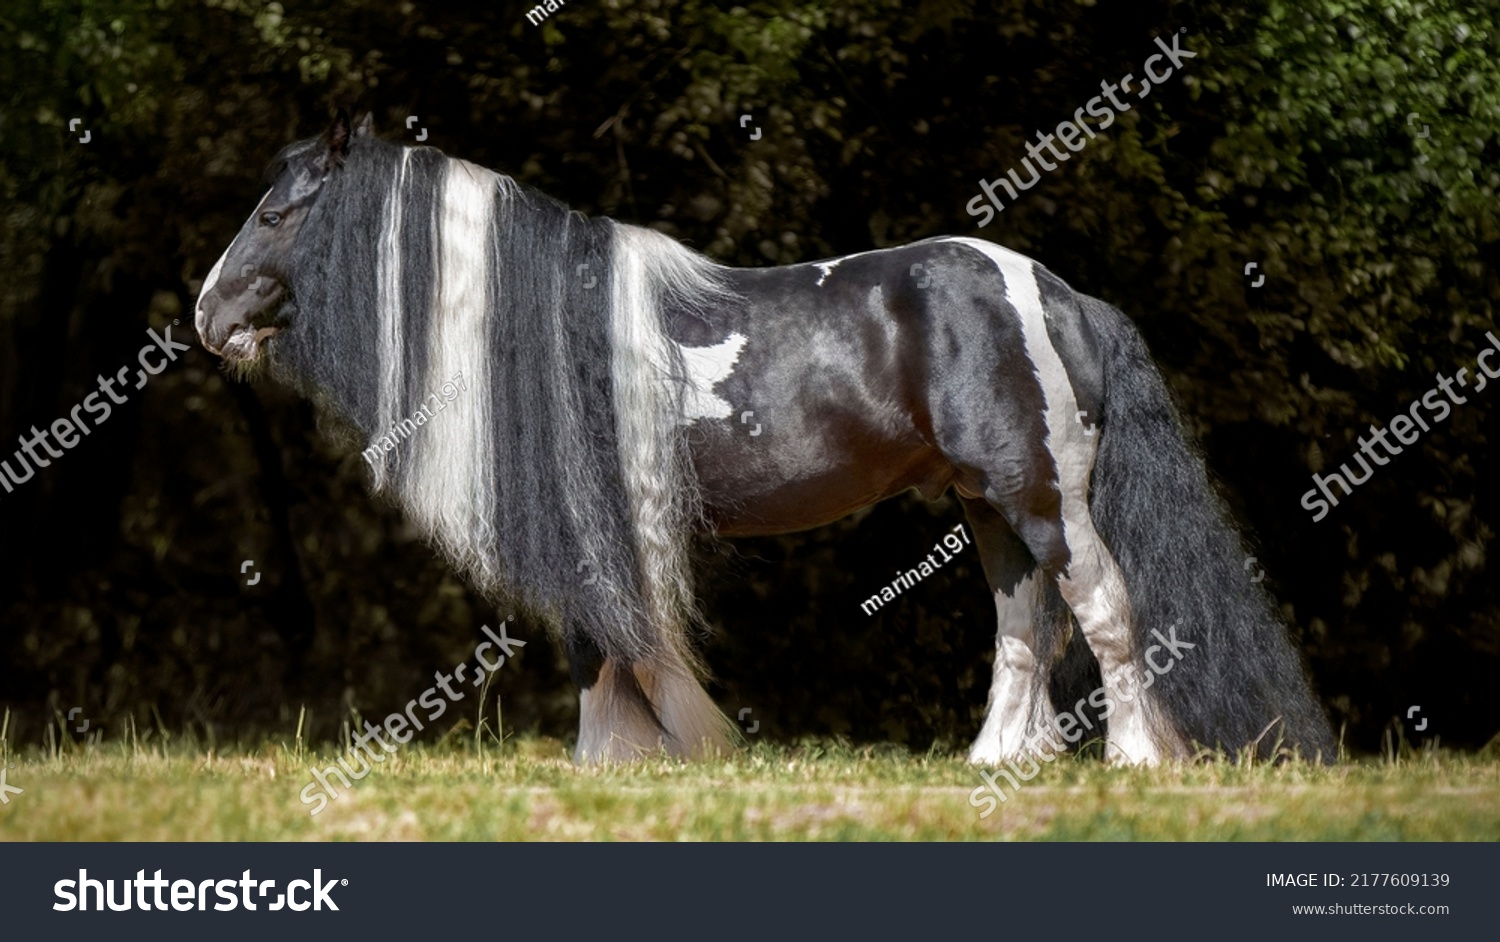 Magnificent Tinker horse with a beautiful mane. Thoroughbred Skewbald  harness gypsy horse. Summer light. Equestrian sports #2177609139